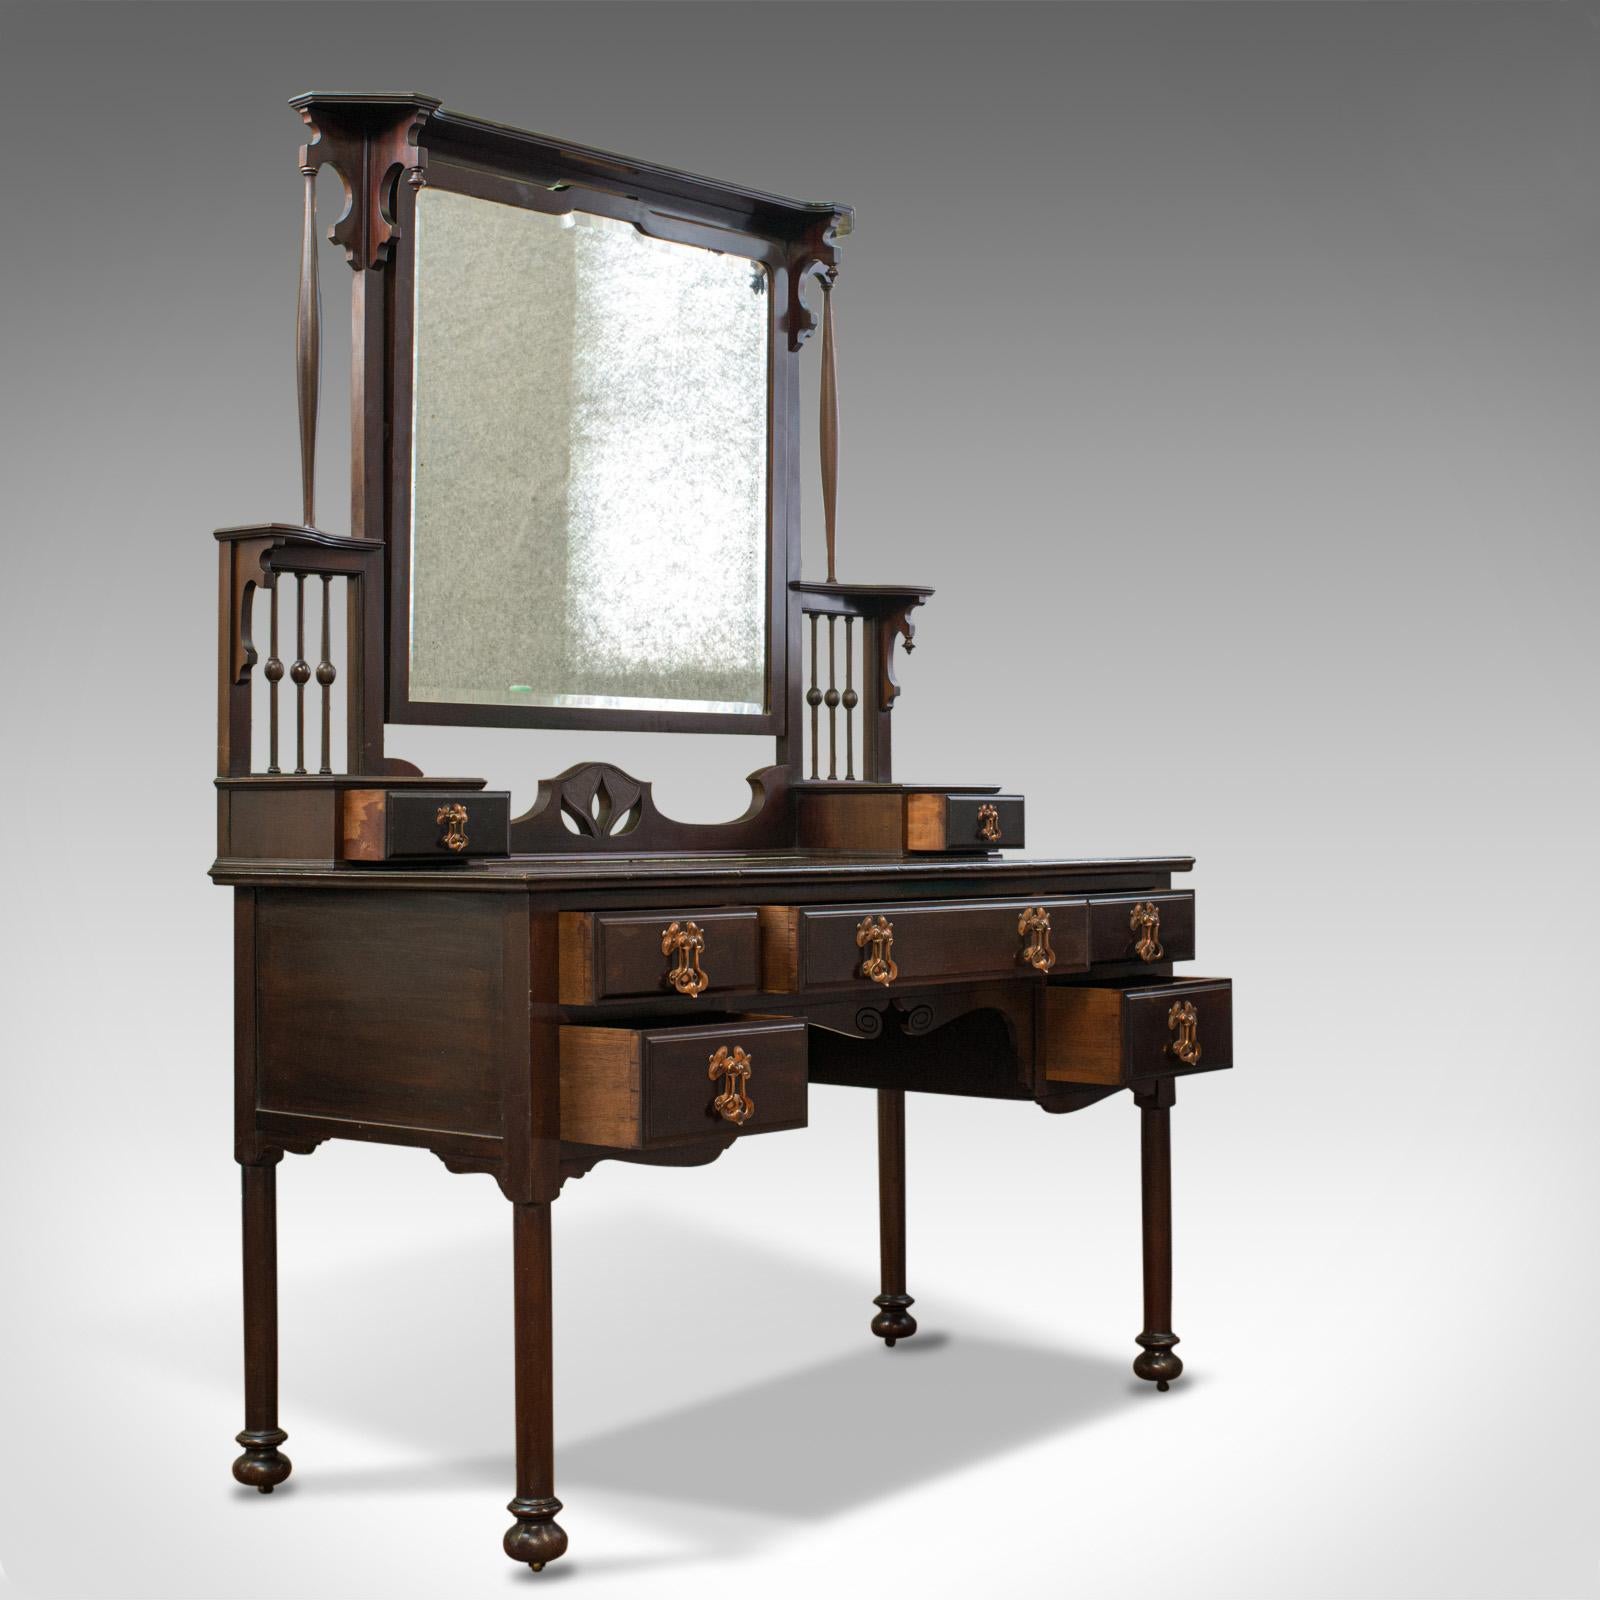 This is an antique Art Nouveau dressing table. An English, Maple And Co., mahogany vanity table dating to the late 19th century, circa 1890.

A quality period piece from renowned cabinet makers Maple and Co.
In select mahogany with a lustrous wax